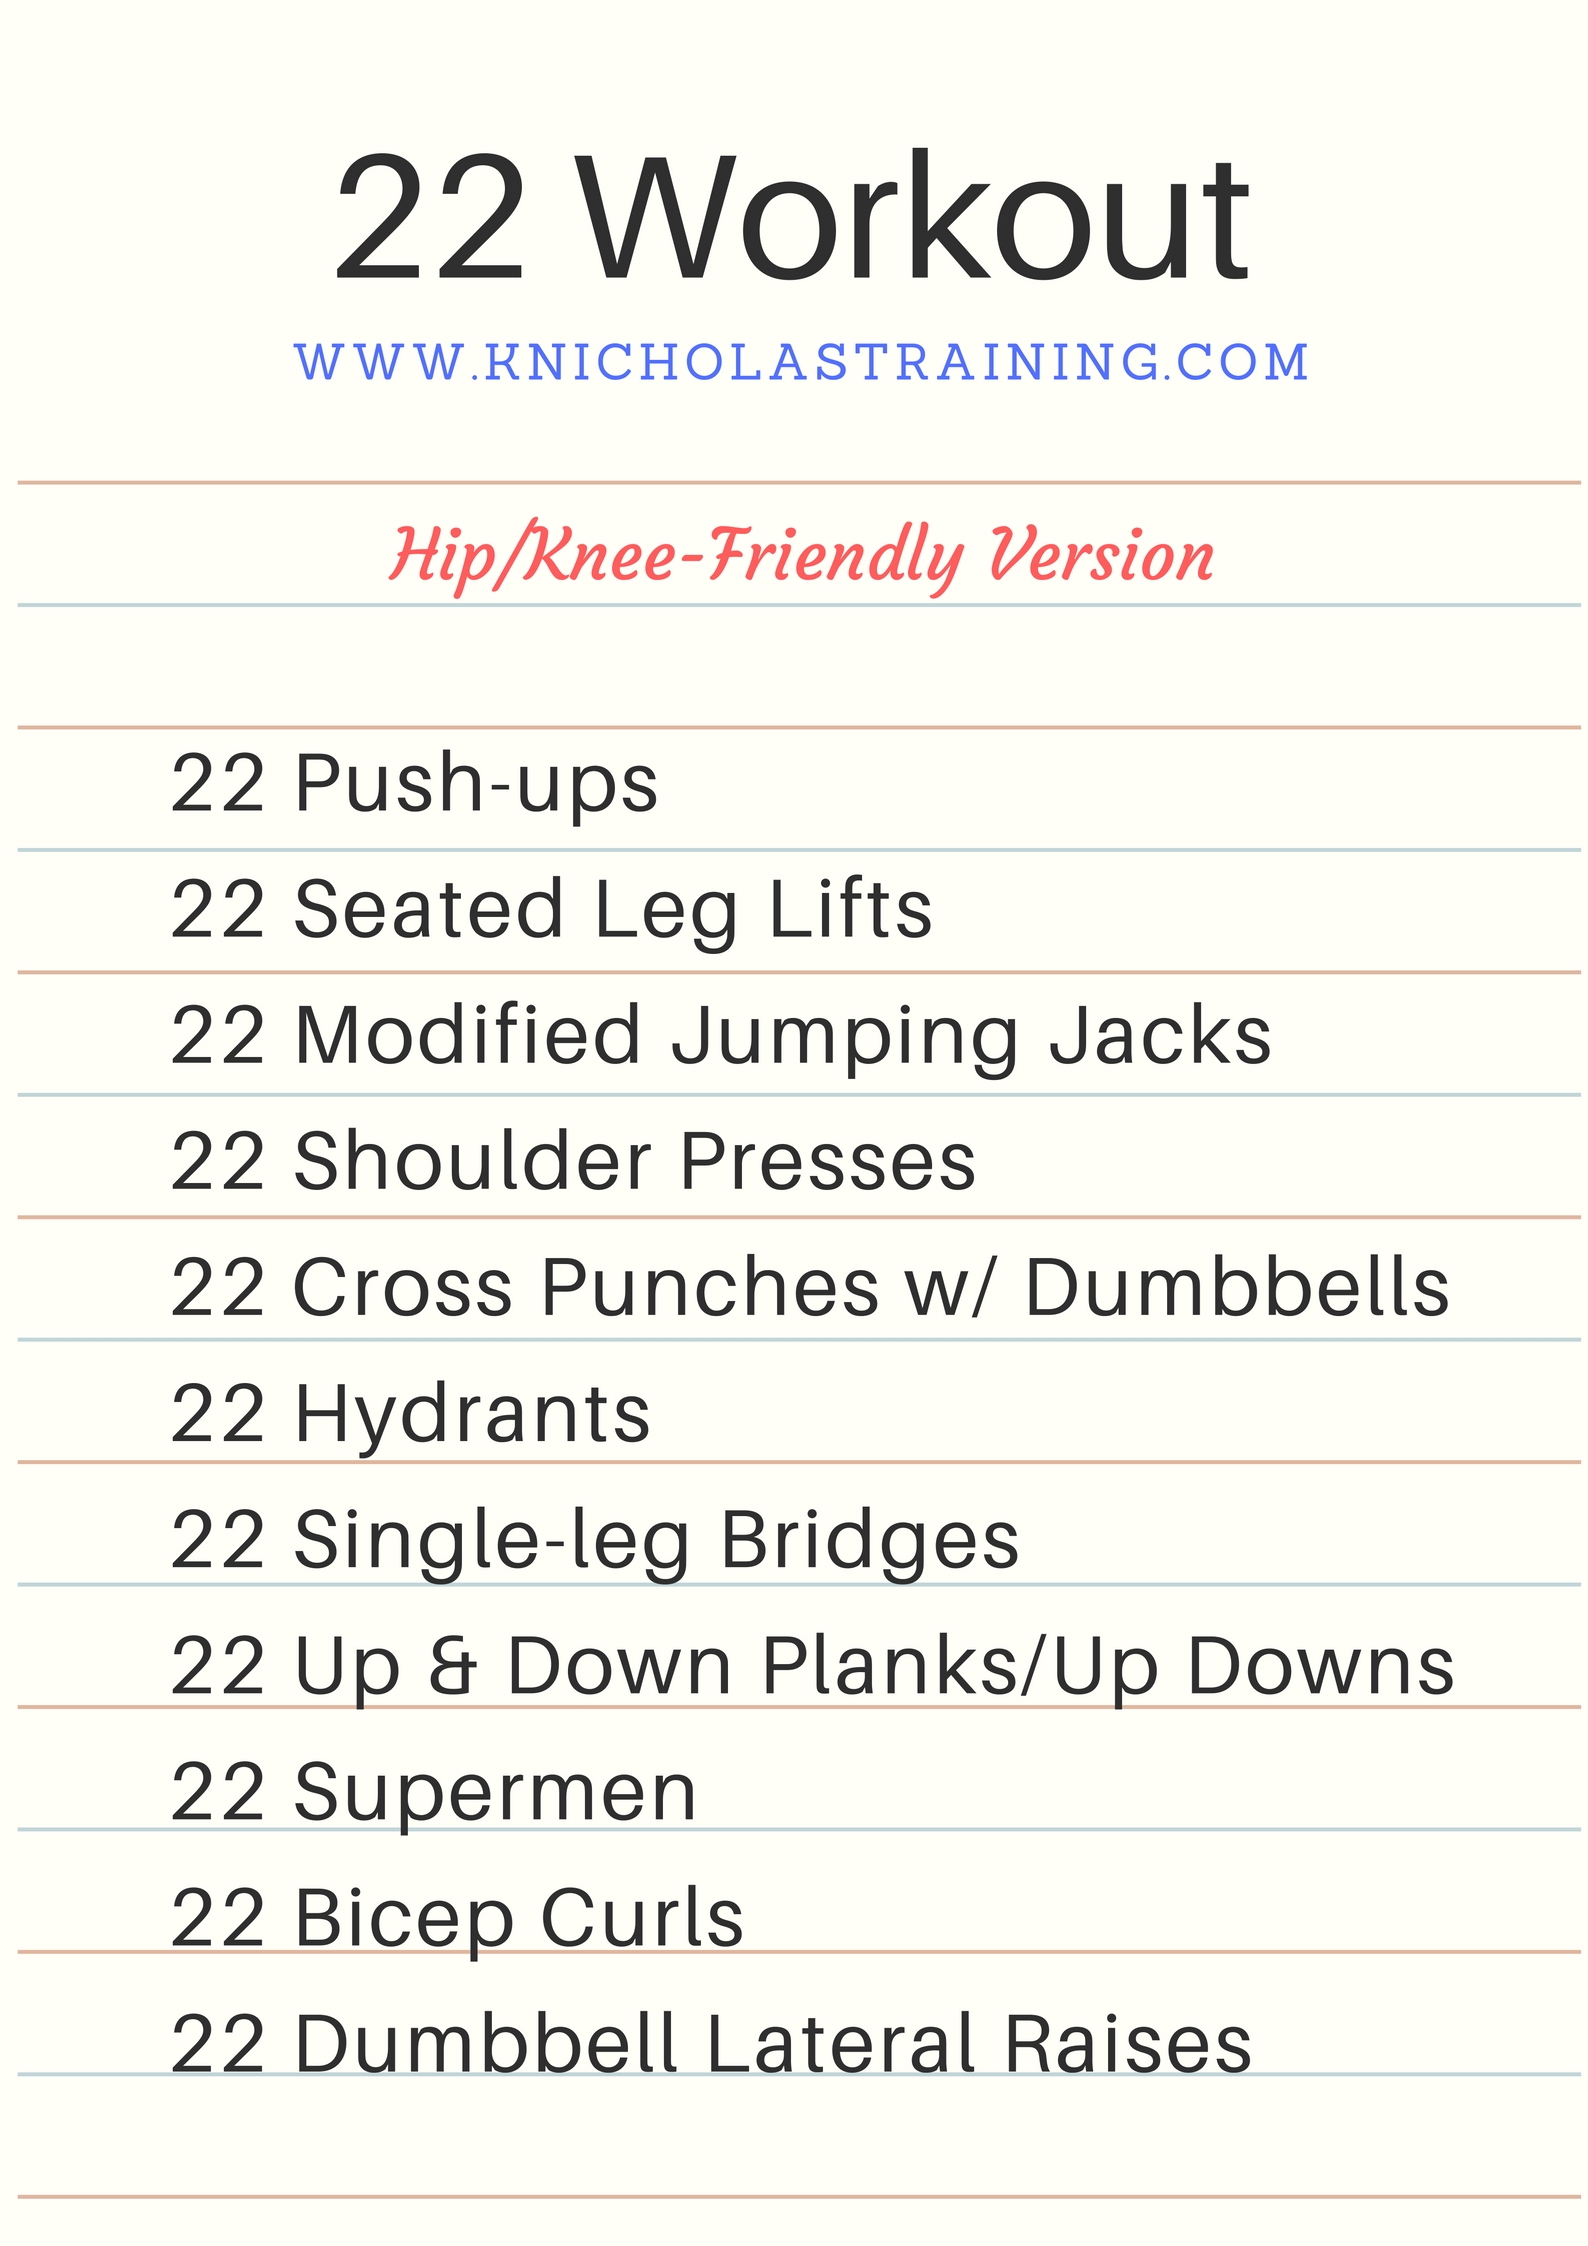 22 Rep Workout - Hip/Knee Friendly Version